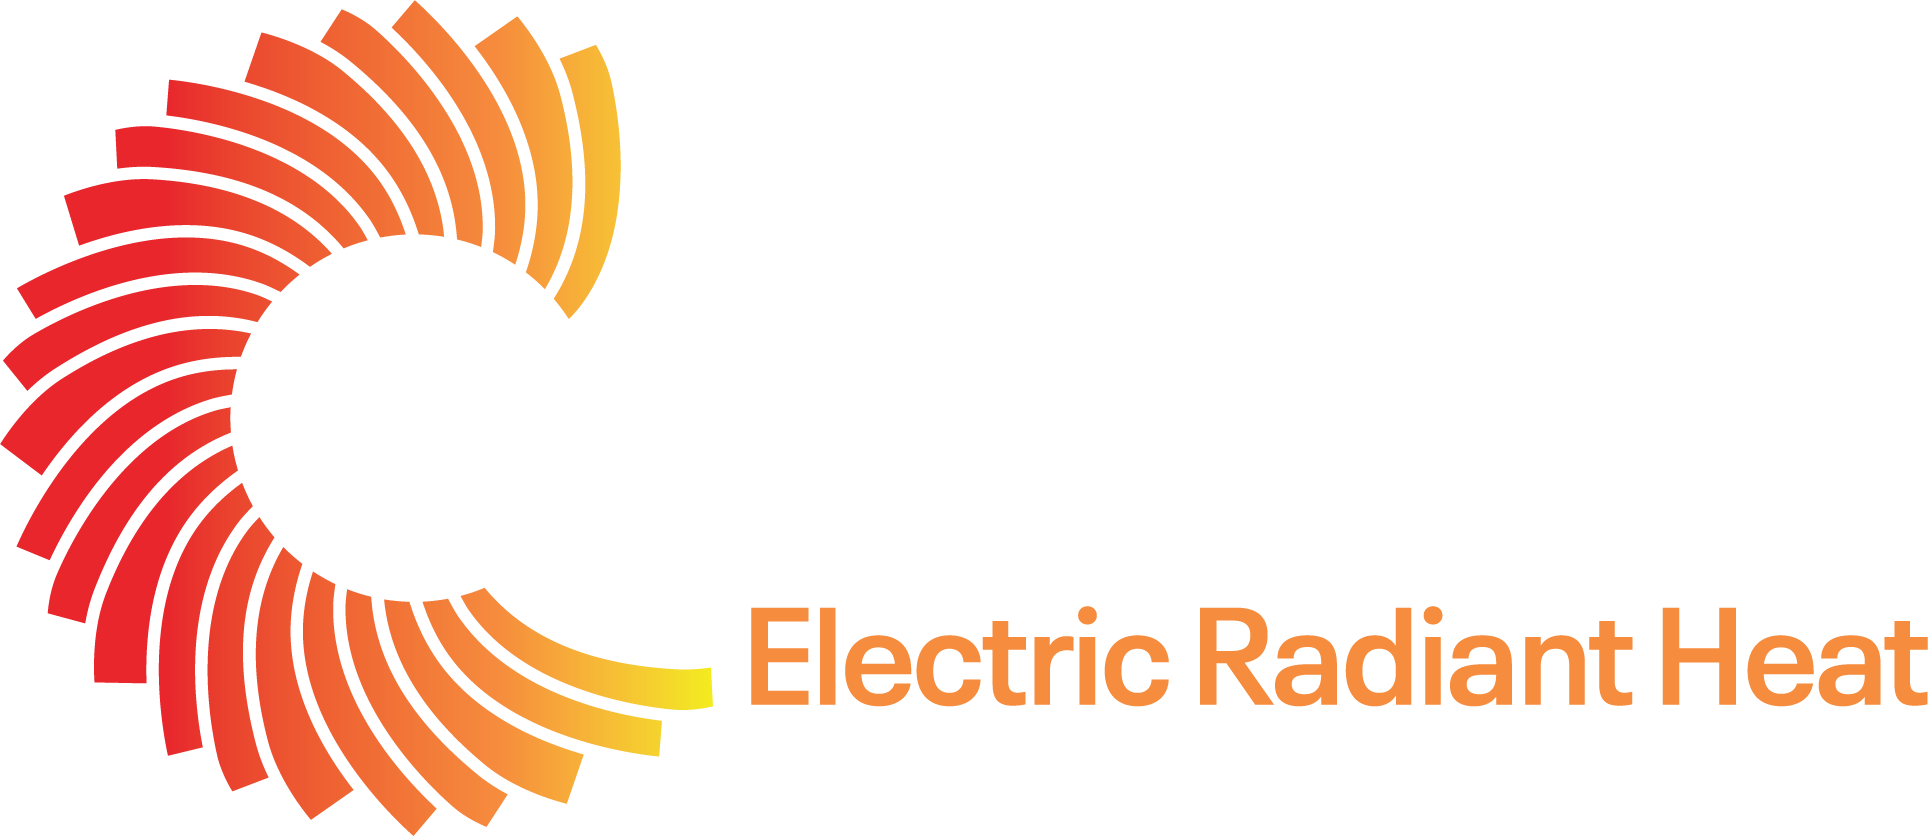 GH-Logo-ElectricRadiantHeat-WhiteText-Outline